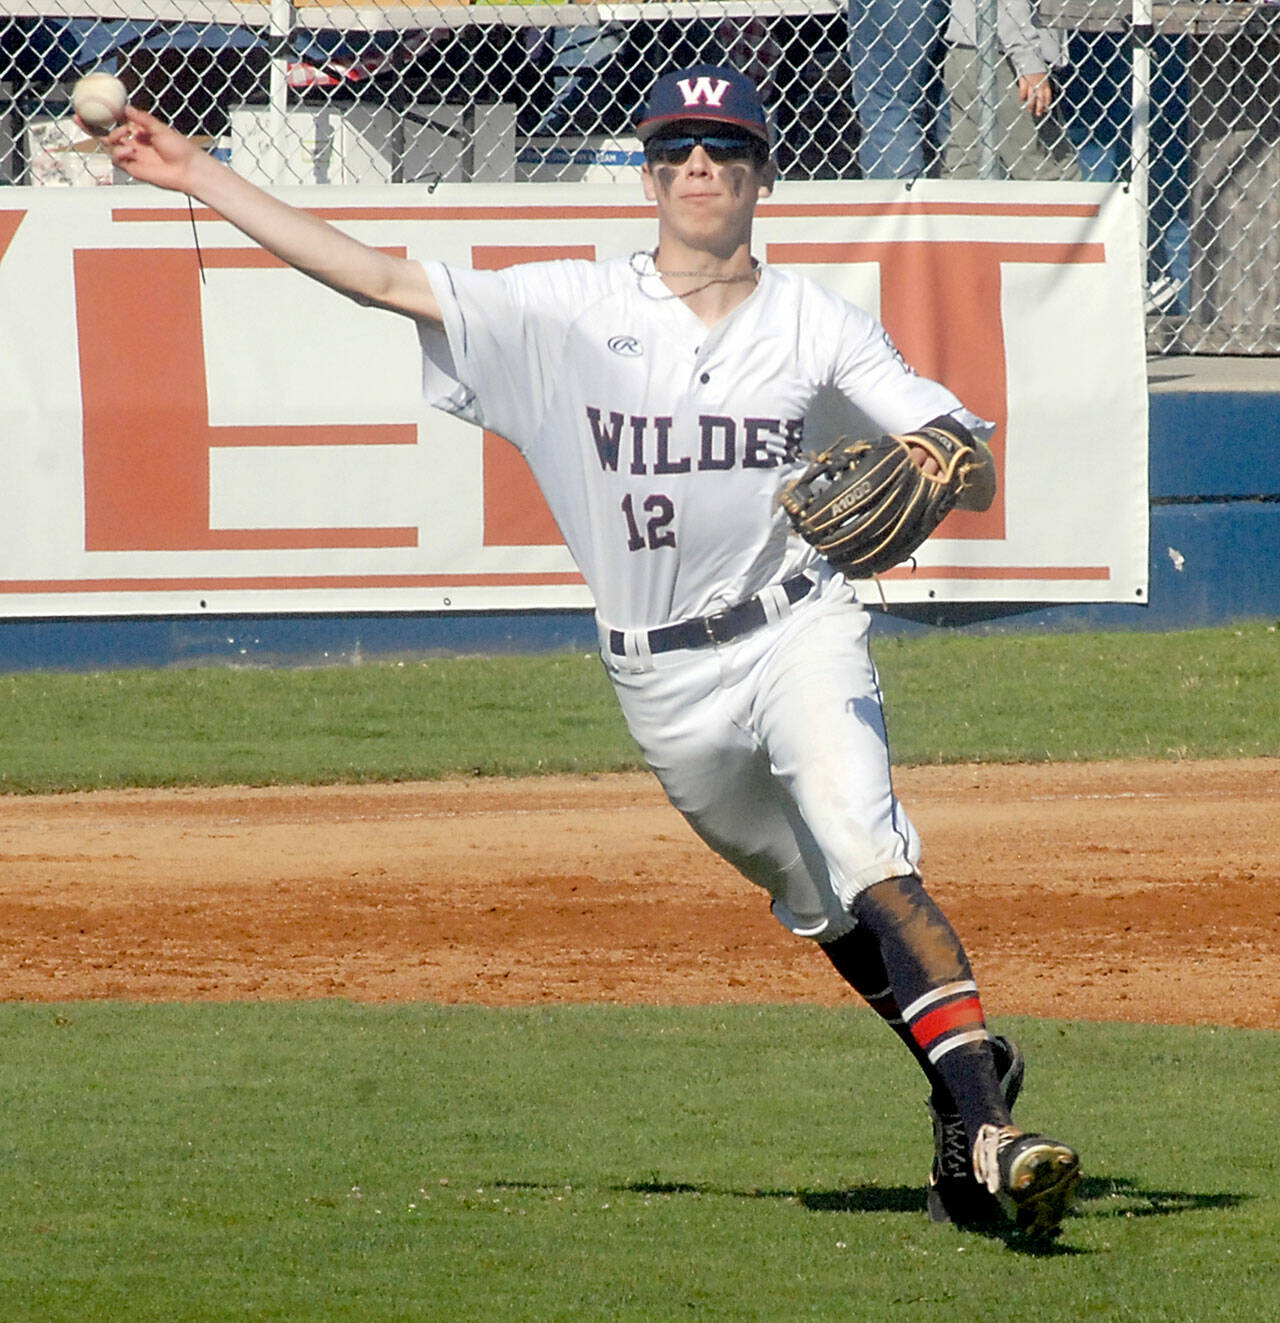 Wilder Senior third baseman Landon Siebel makes a throw to first during a 2021 contest at Civic Field. Tryouts for the American Legion baseball program will be held later this month. (Keith Thorpe/Peninsula Daily News)